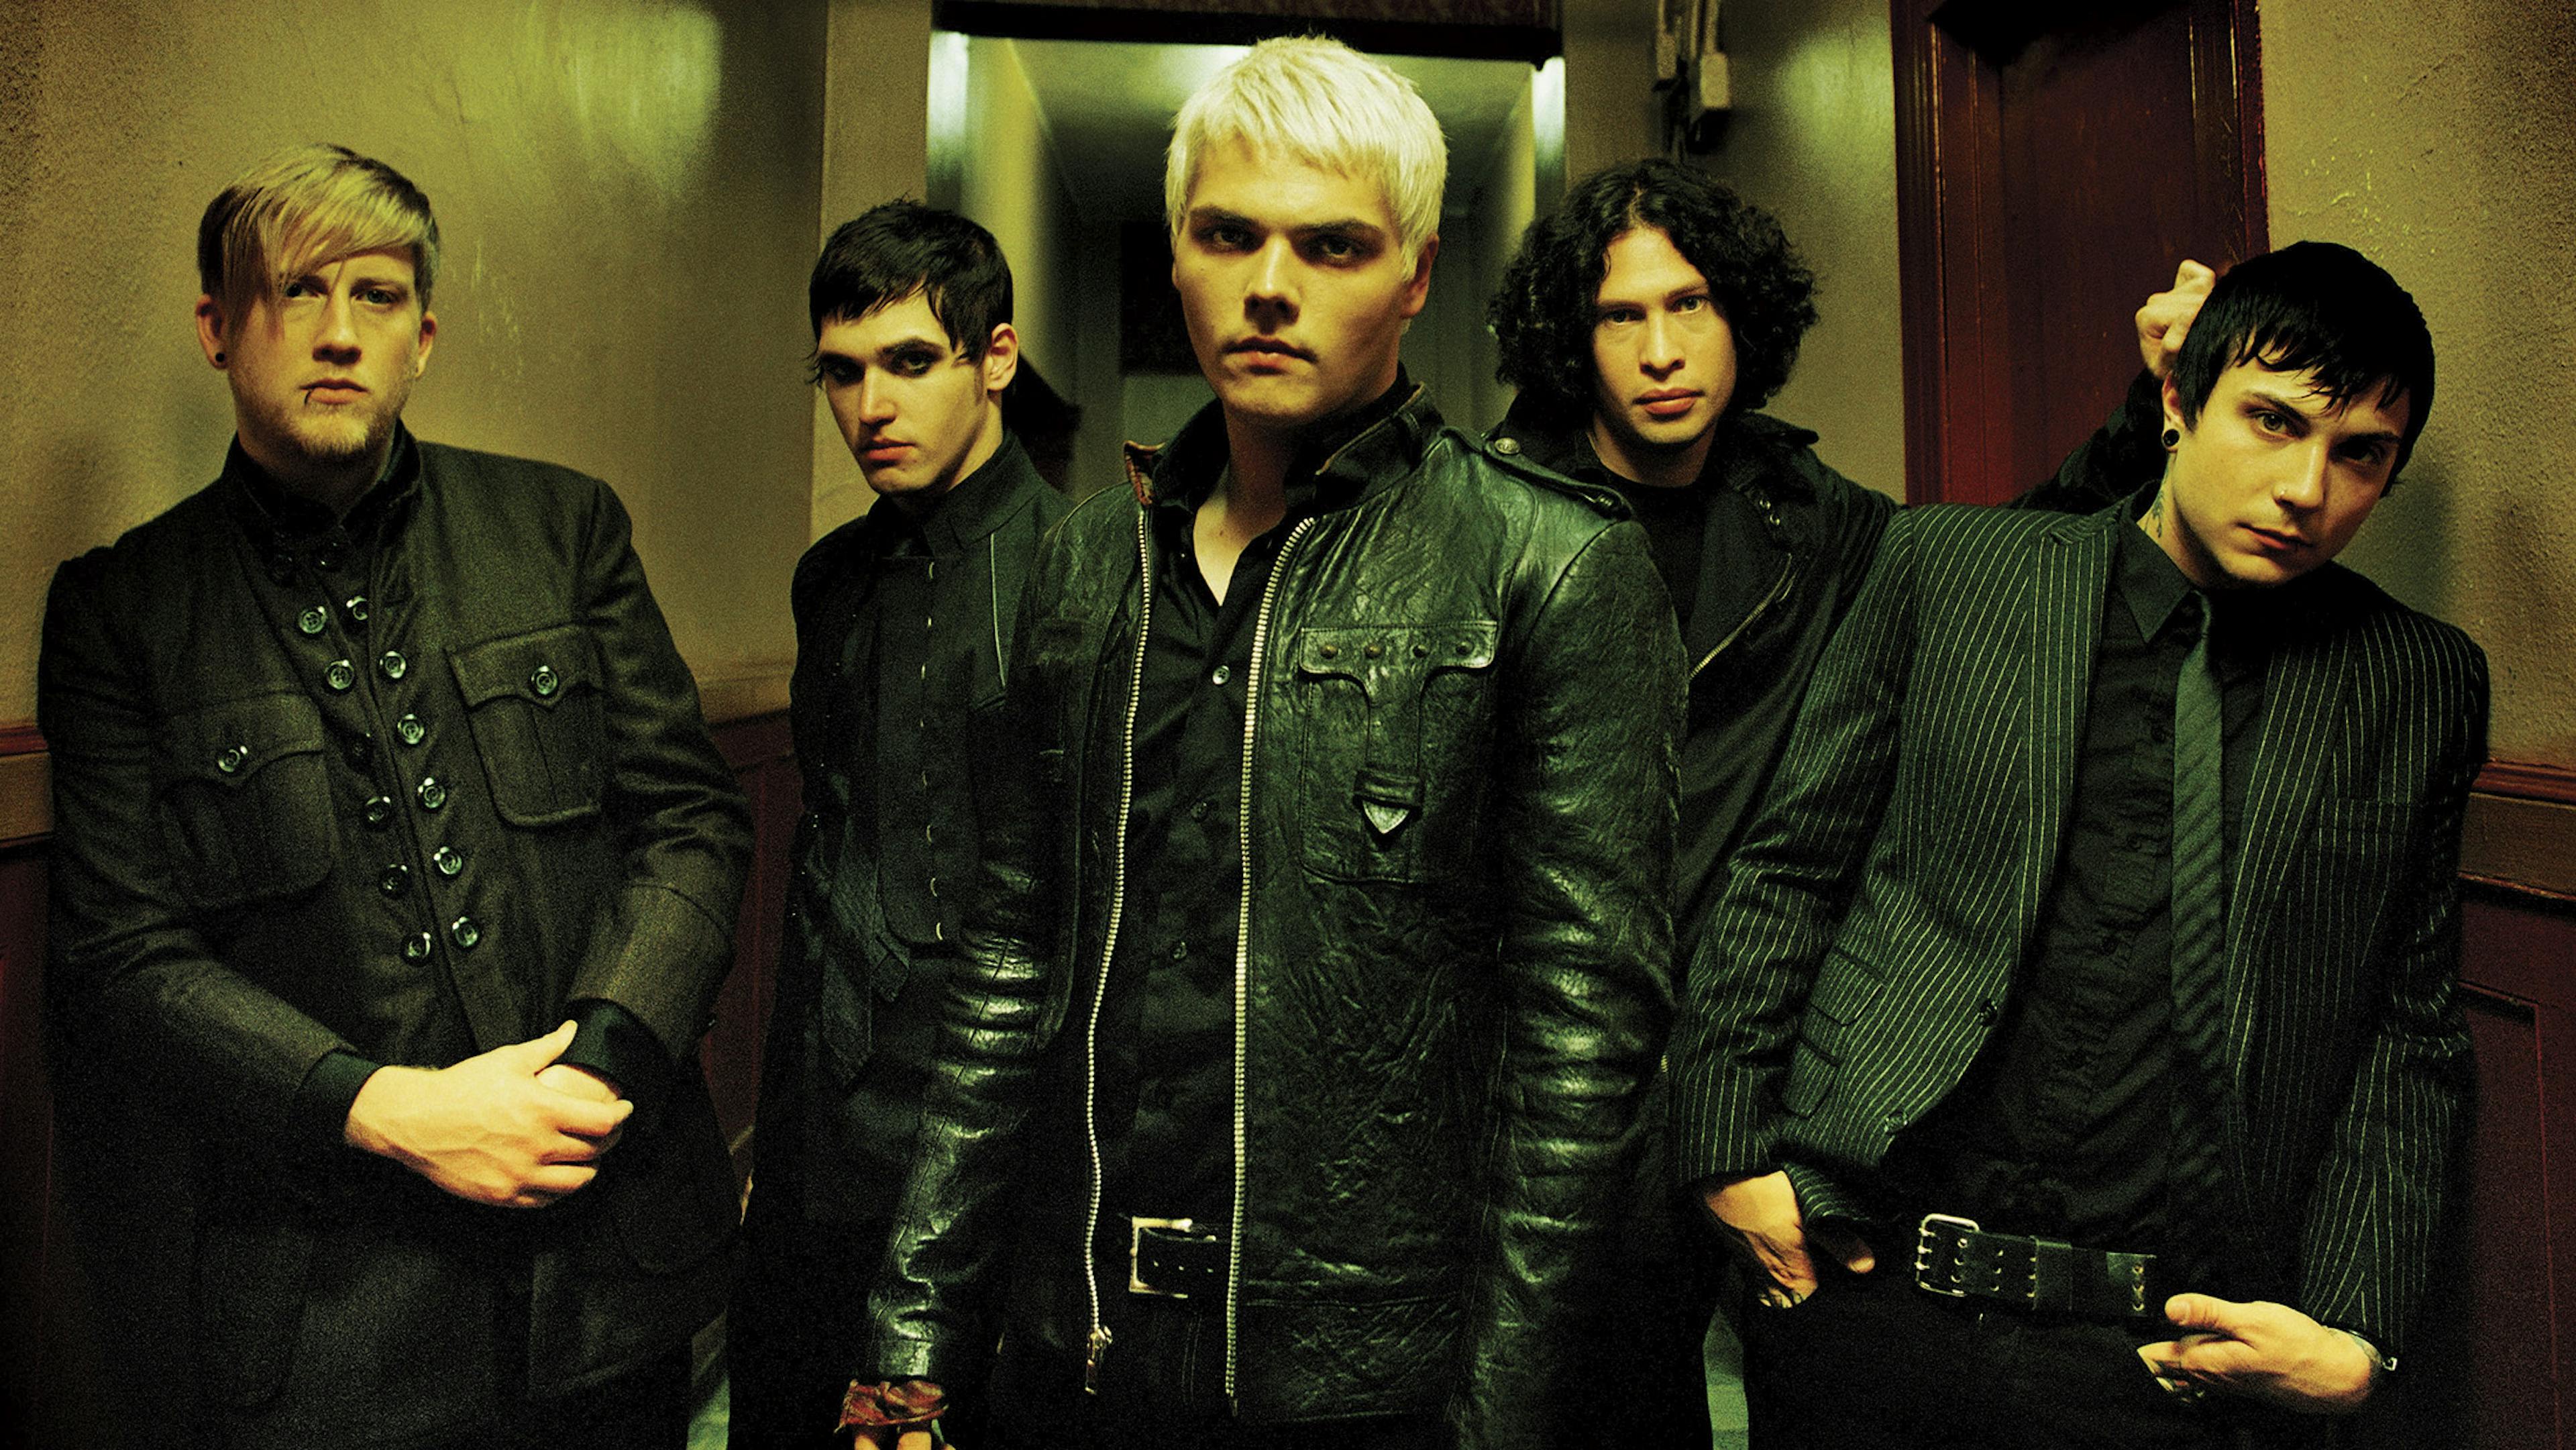 “People turn up expecting to see one of the greatest shows of their lives”: How My Chemical Romance took over the UK